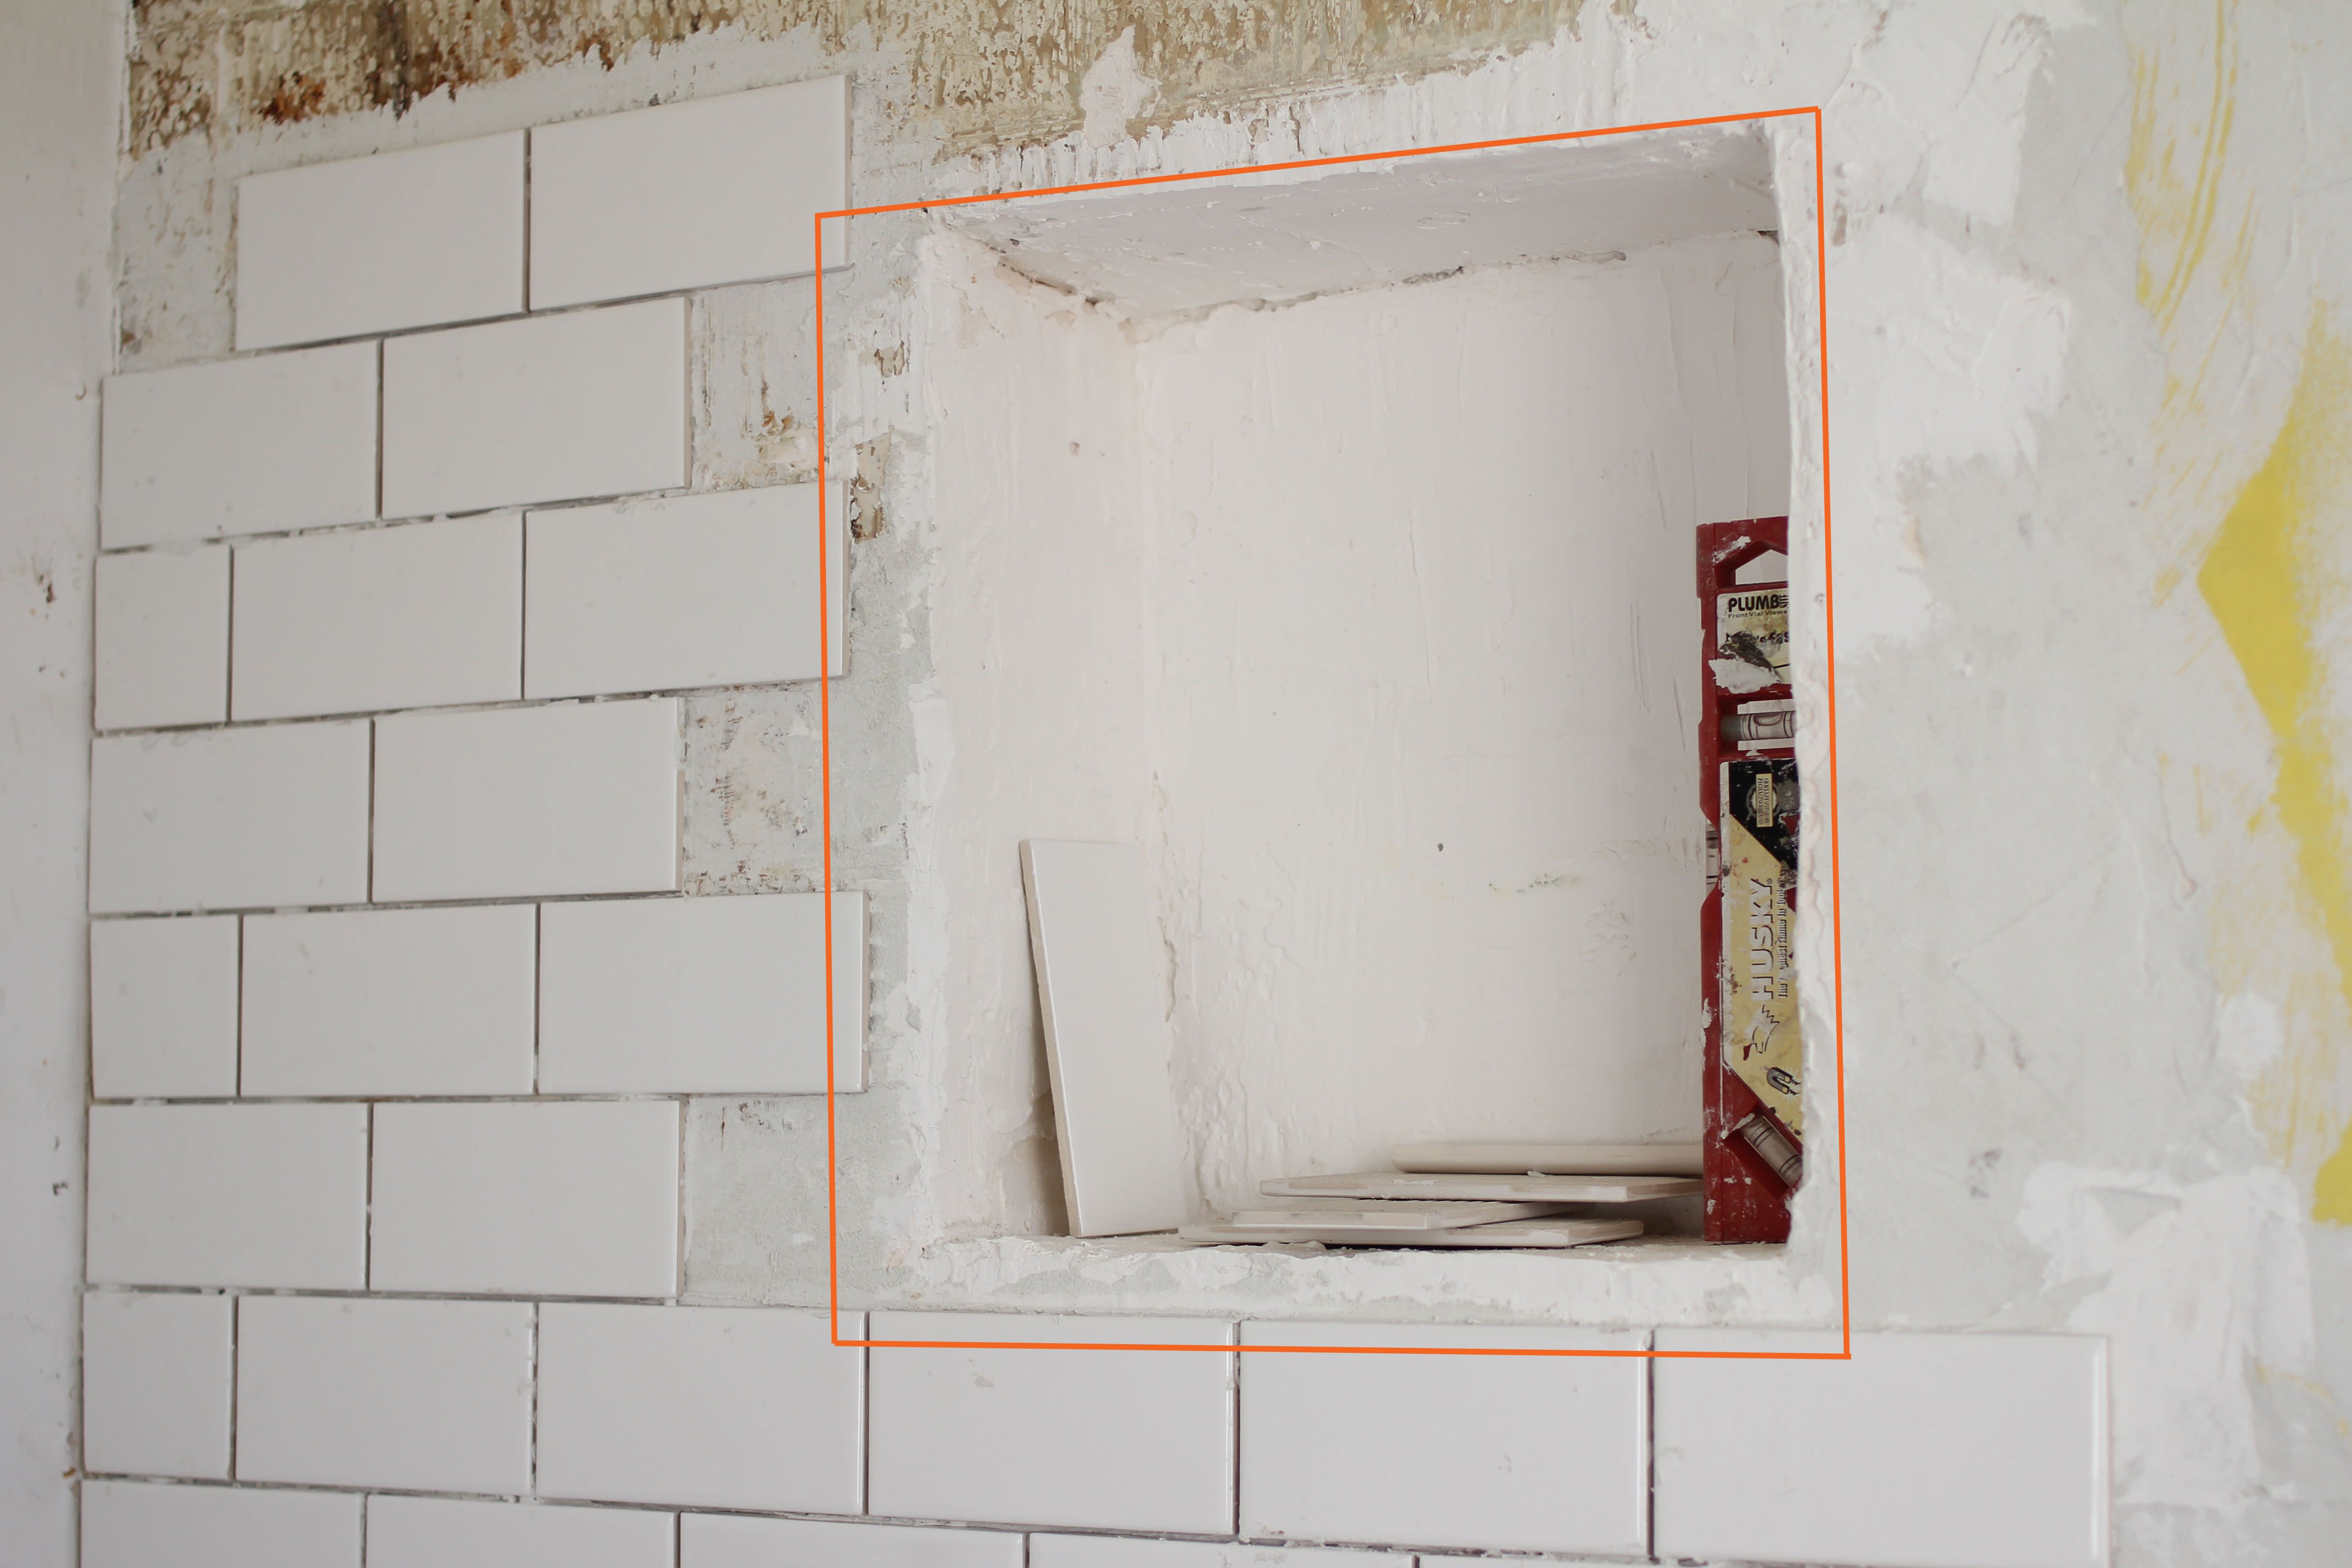 DIY Renovation Project: How To Build a Recessed Shower Shelf